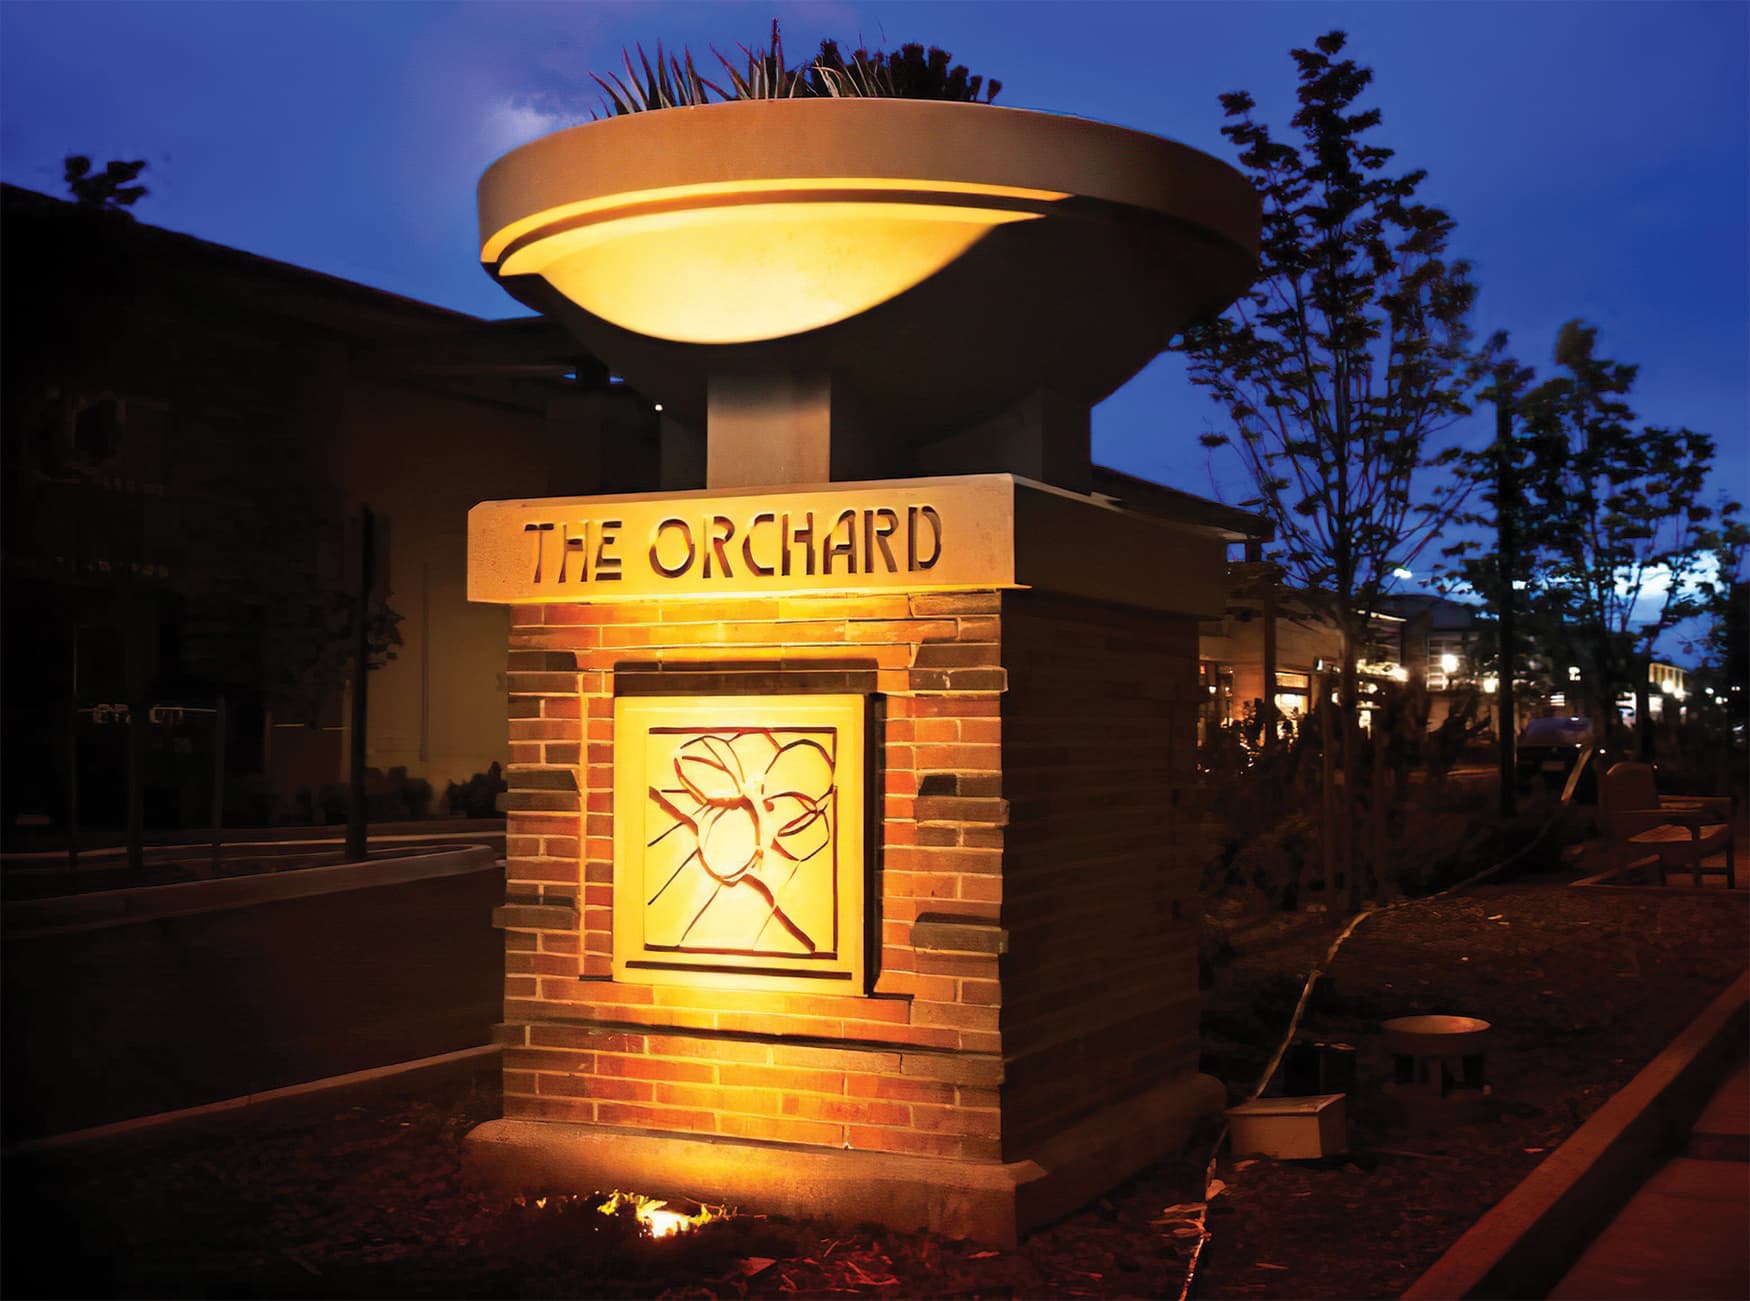 RSM Design worked to create a wayfinding system and Environmental Graphic Design program for The Orchard, a mixed-use retail project in Westminster, Colorado. Project Monument Design.